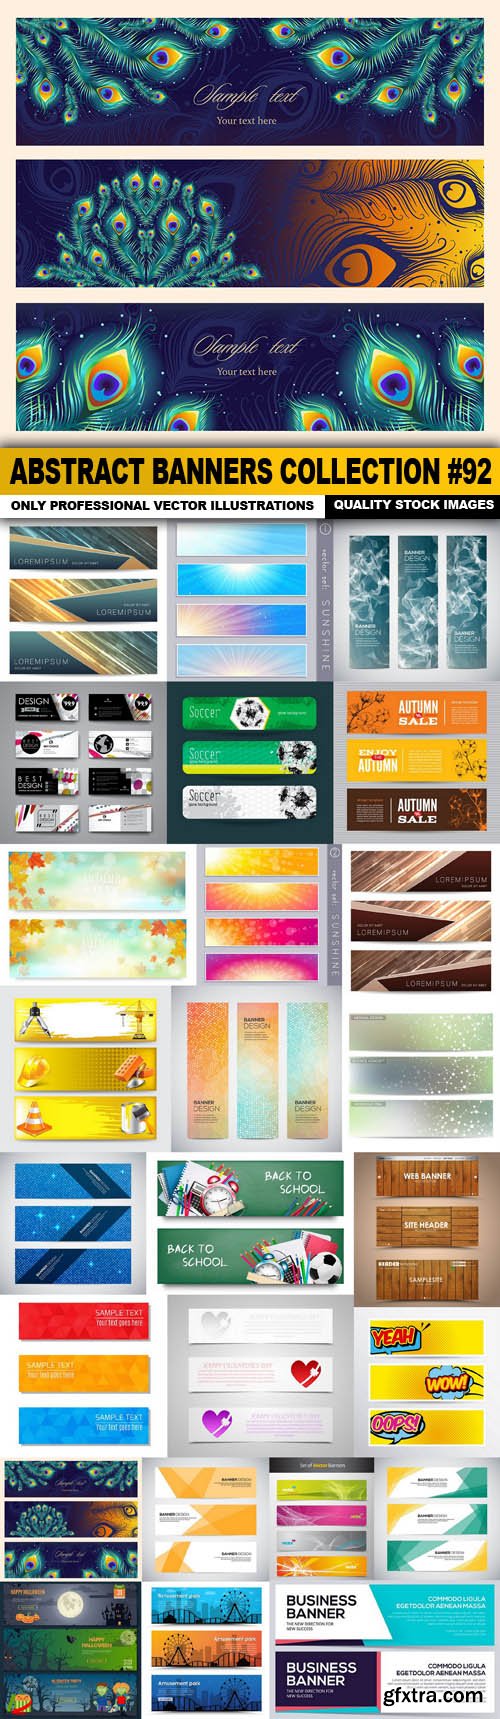 Abstract Banners Collection #92 - 25 Vectors